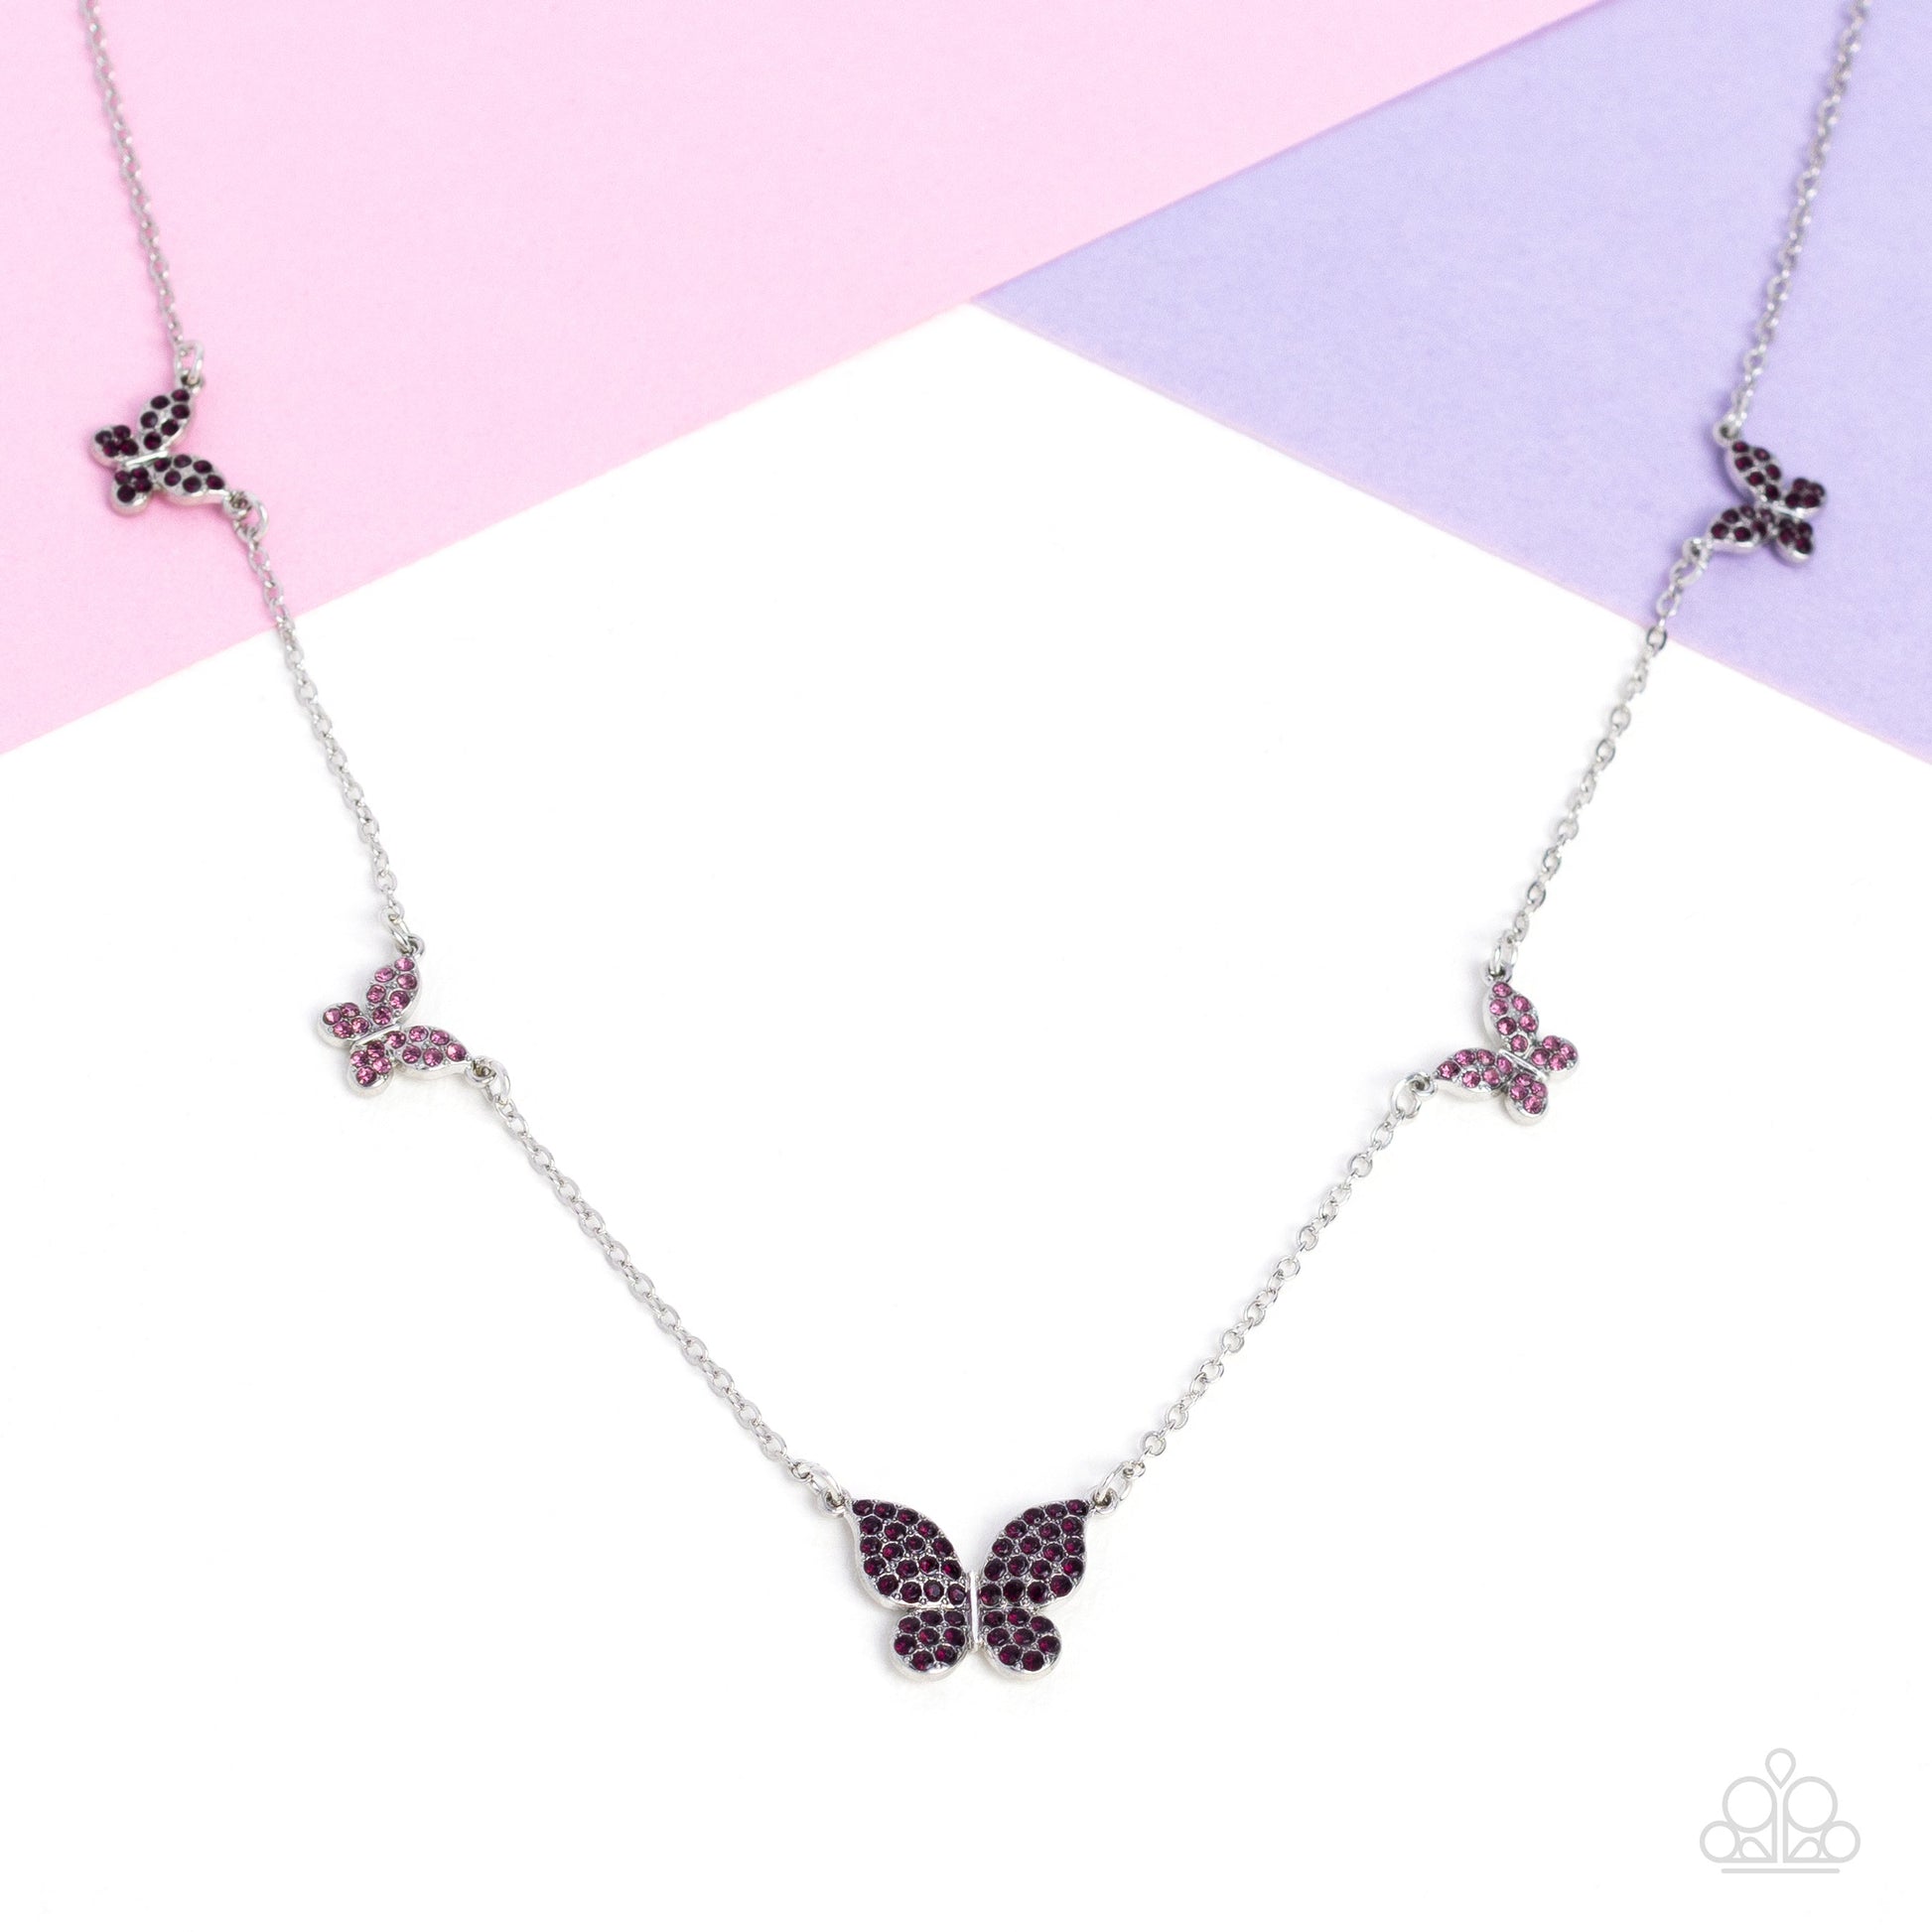 FAIRY Special - Purple Butterfly Necklace - Paparazzi Accessories - Floating along a dainty silver chain, a collection of silver butterflies in varying sizes coalesces around the neckline for a whimsical finish. Each butterfly features a monochromatic shimmer of amethyst and light amethyst rhinestones for a sparkly statement.